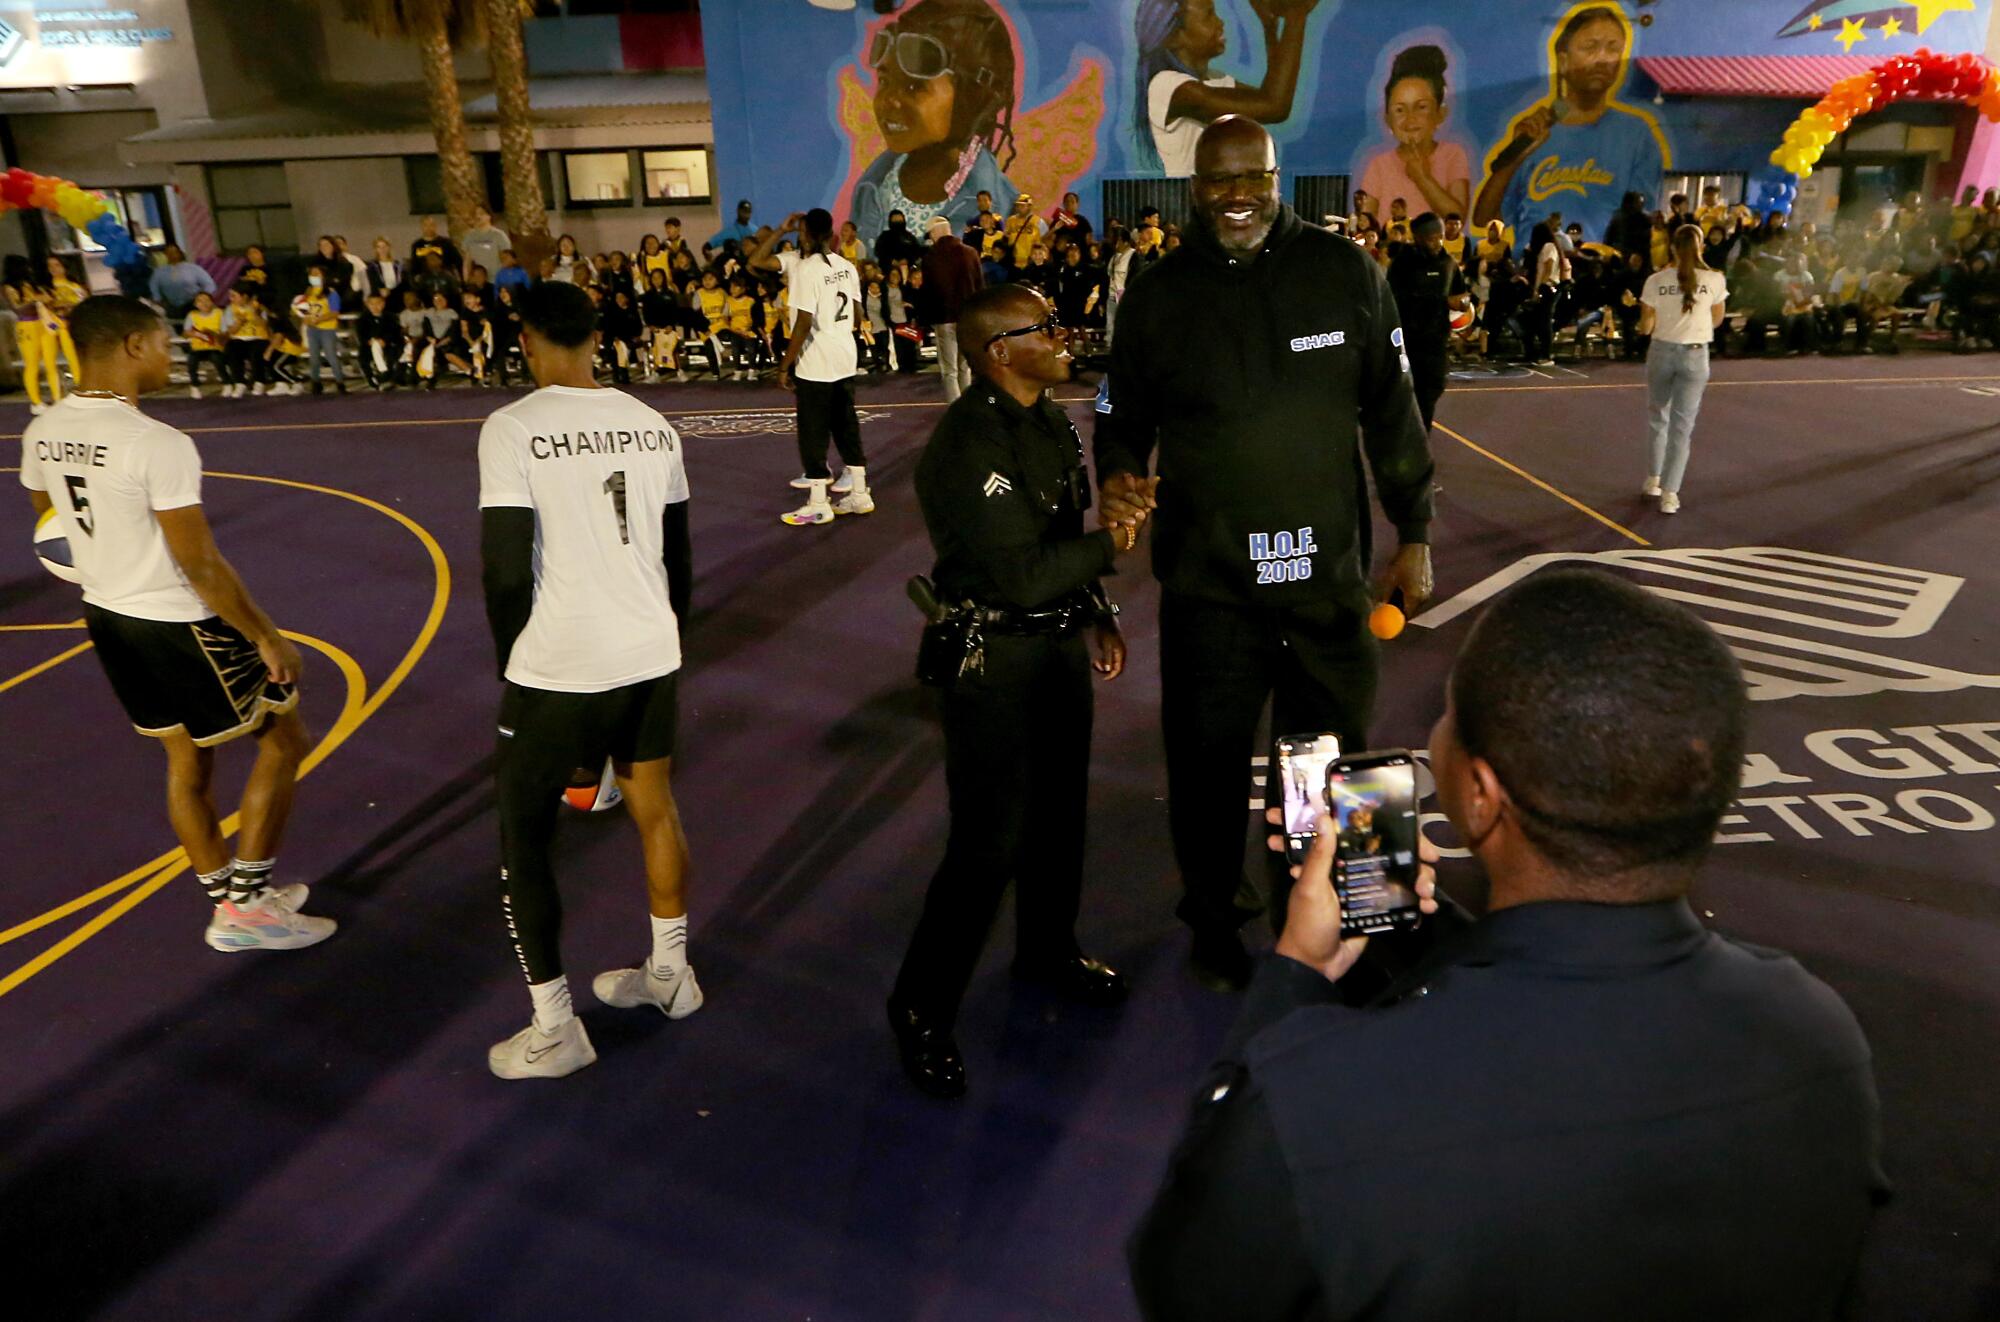 Shaquille O'Neal poses for photos at the Challengers Boys & Girls Club while shaking hands with a police officer.